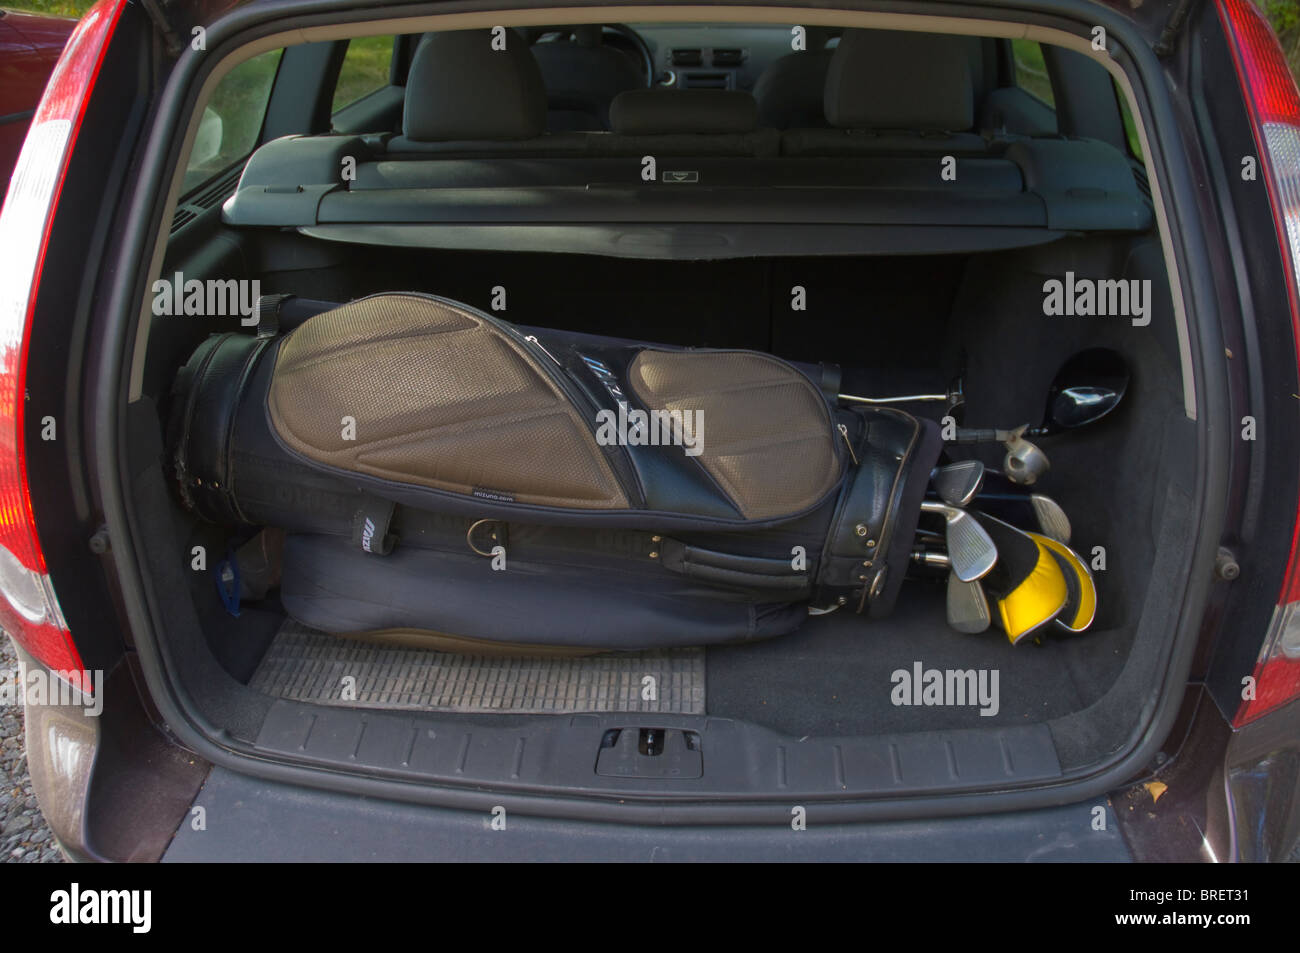 Golf bag in trunk of car Finland northern Europe Stock Photo - Alamy